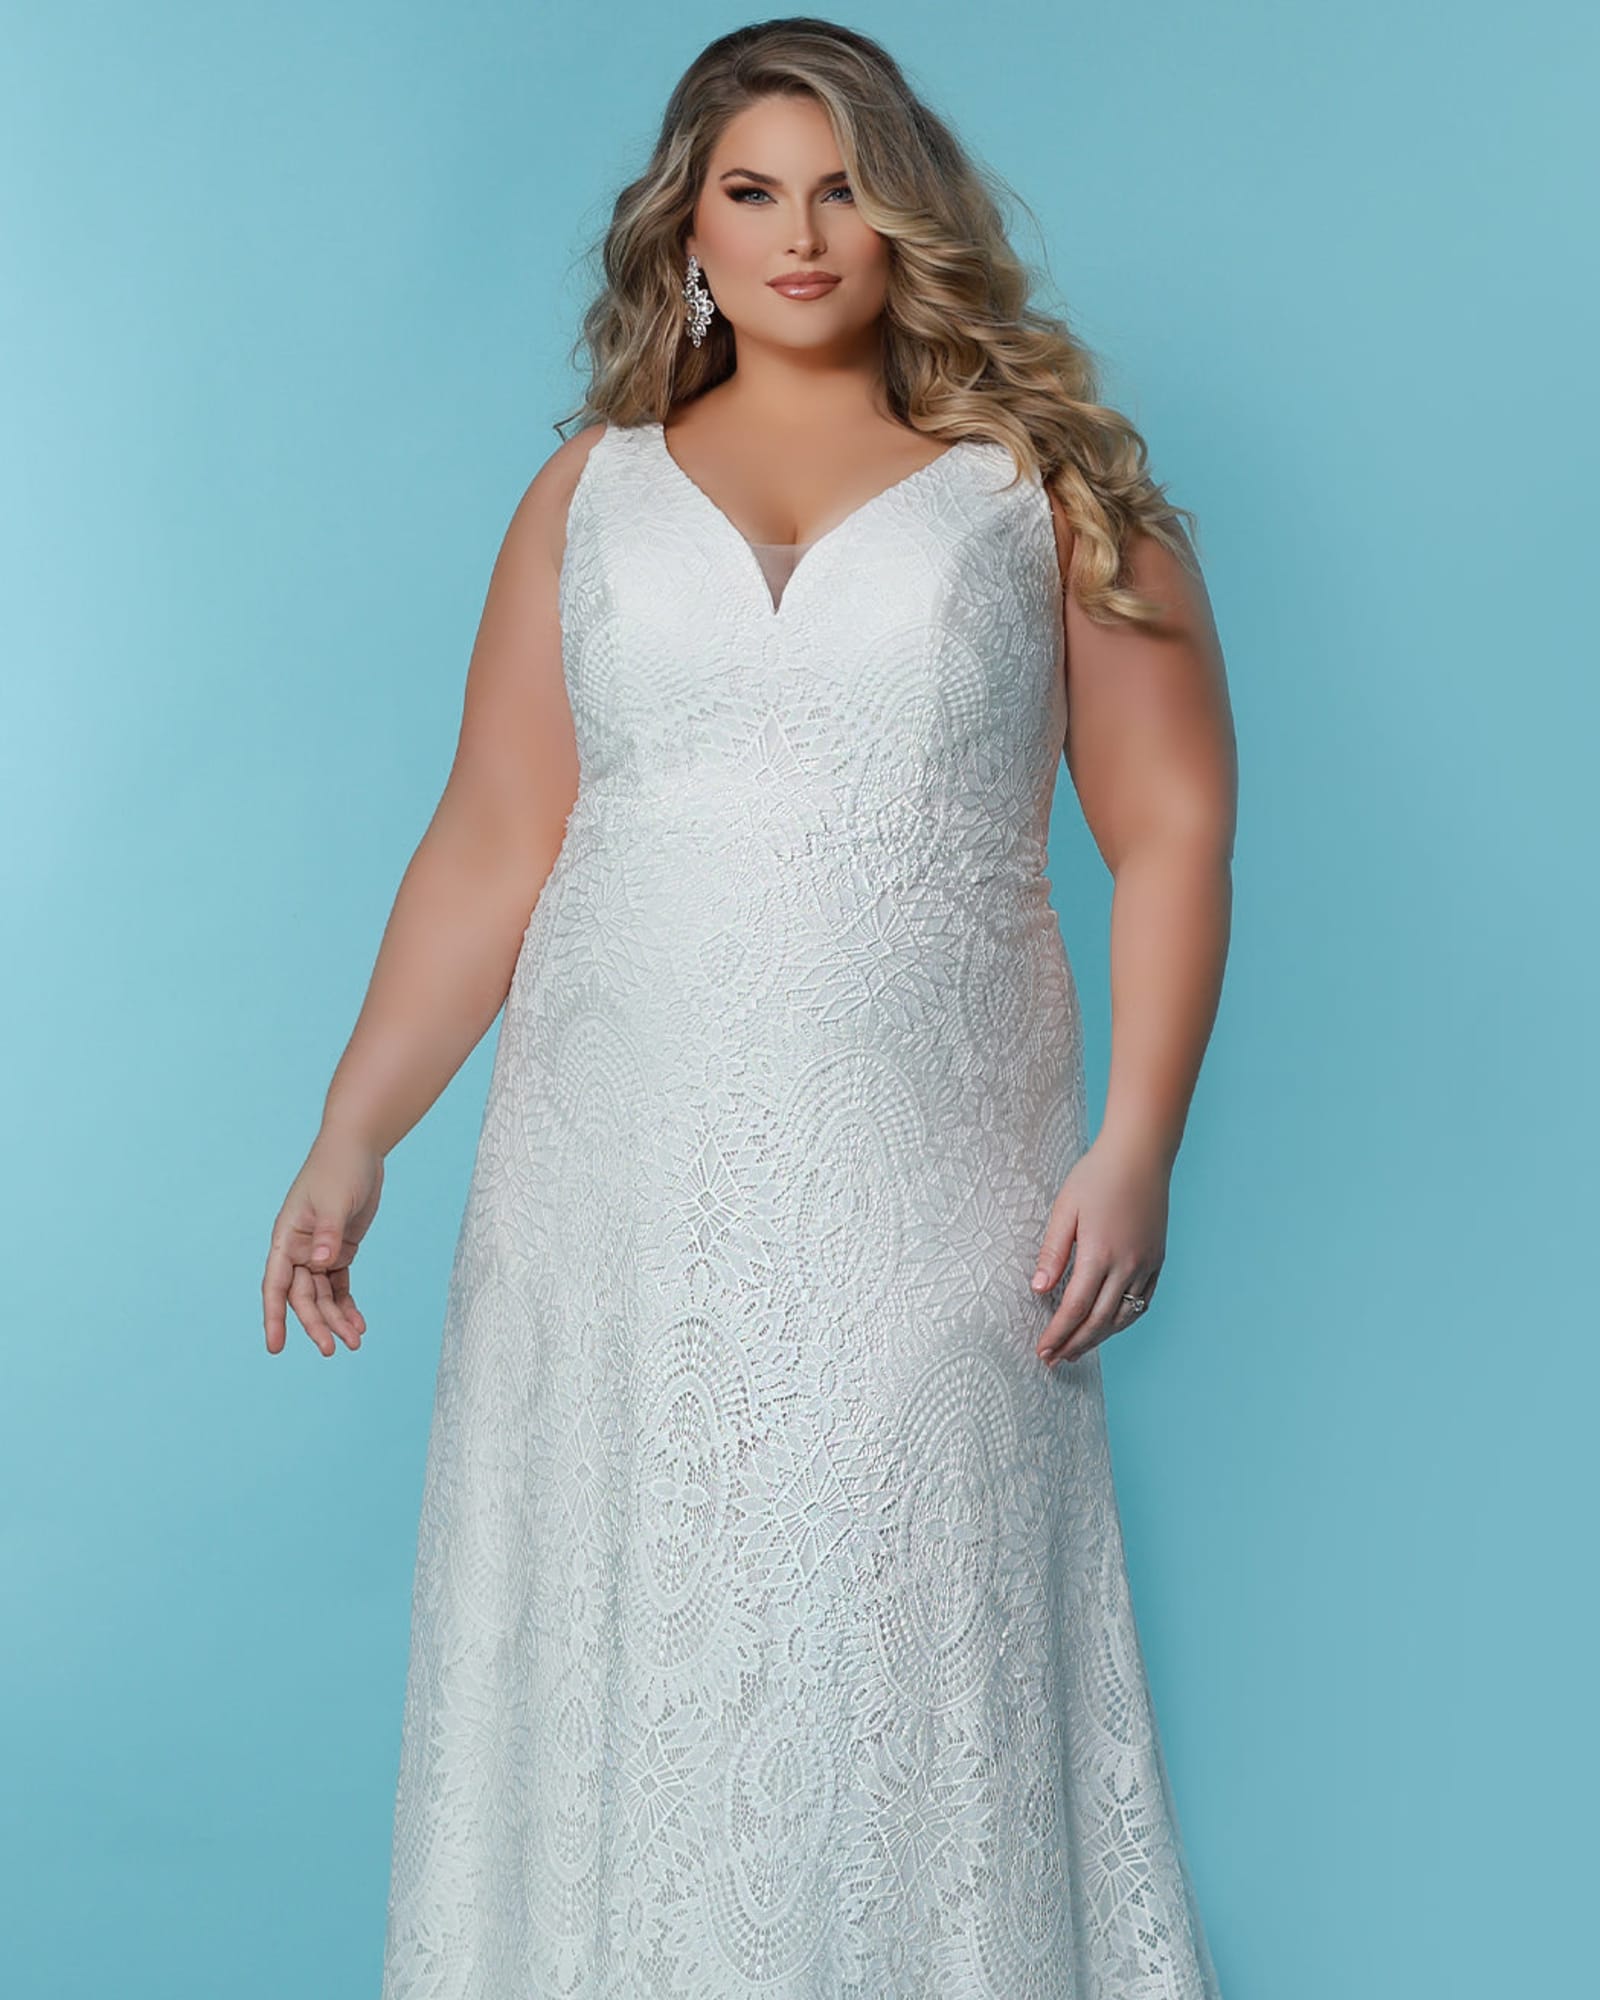 Kiyonna Women's Plus Size Amour Long Lace Wedding Gown, Bridal Dress with  3/4 Long Sleeves in Ivory Vintage-Inspired Lace, Size 0X (10-12) at   Women's Clothing store